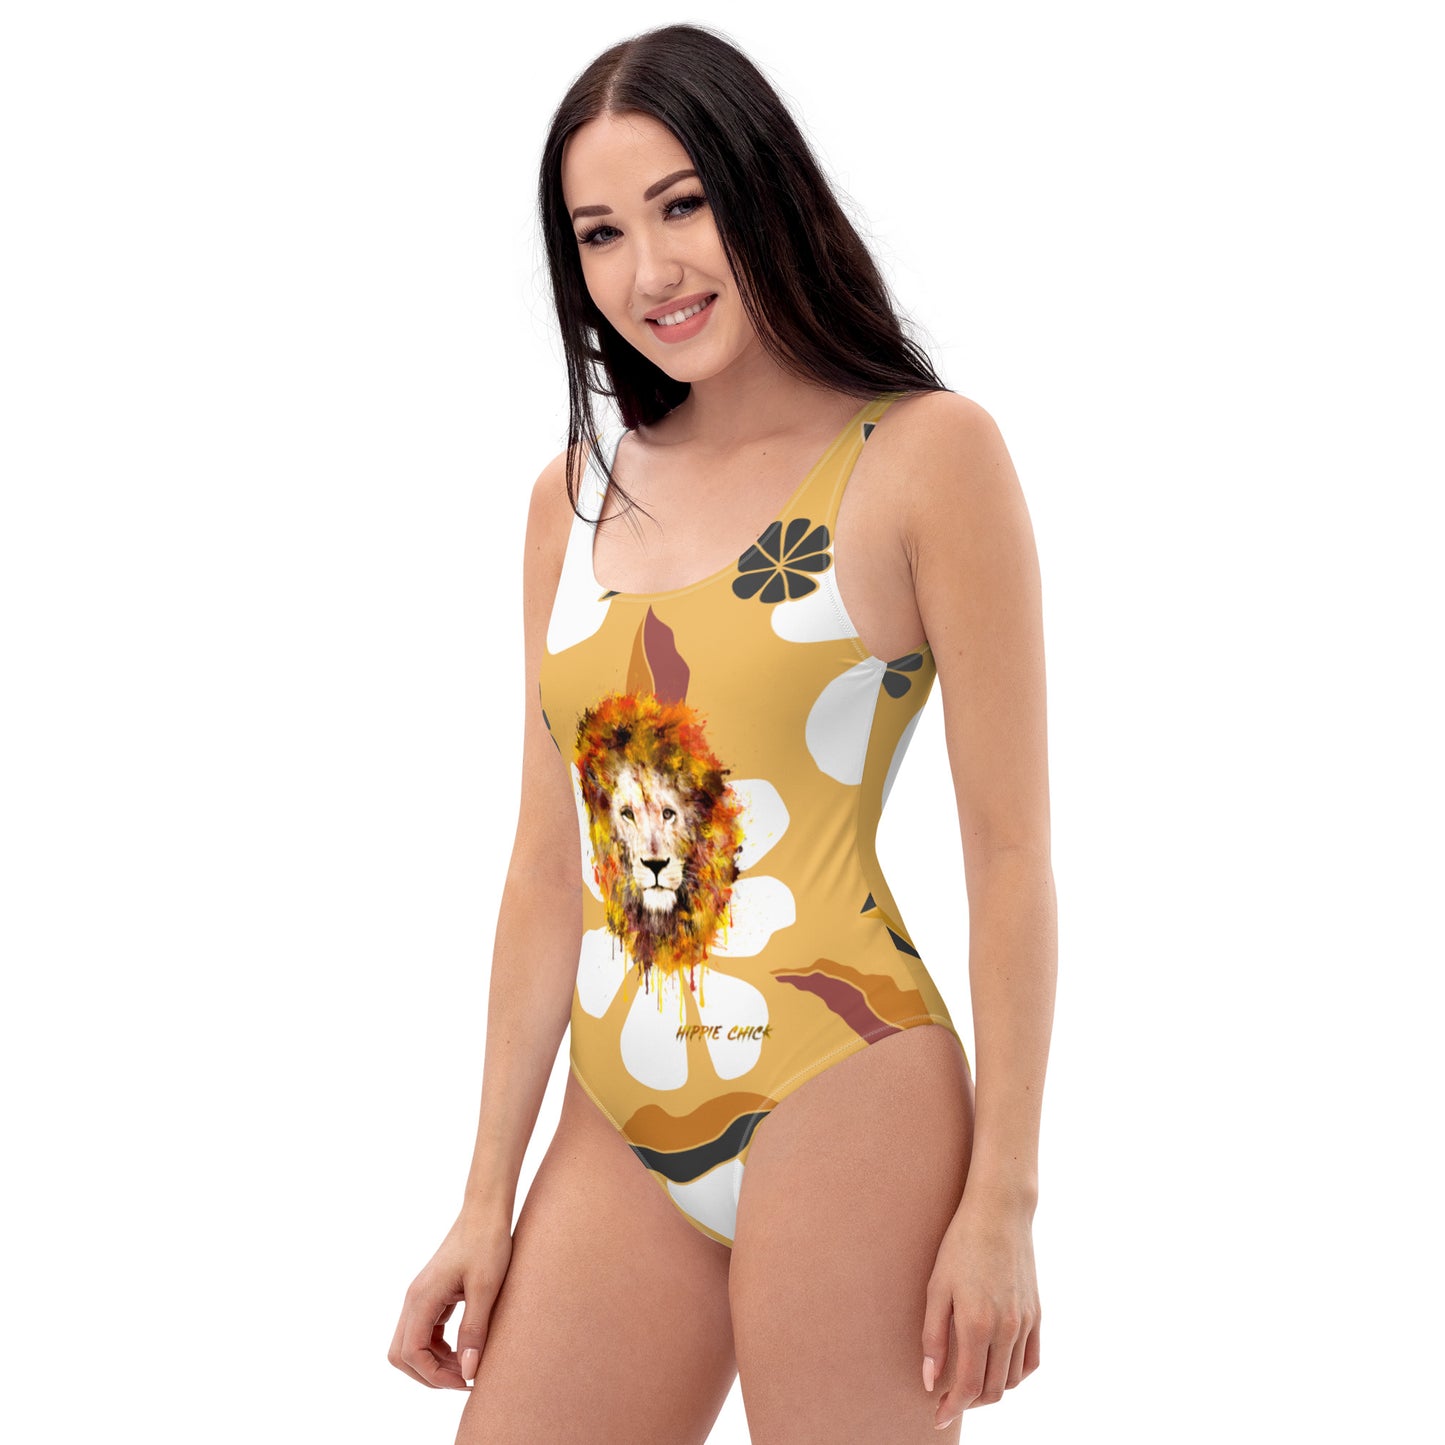 White Flowers One Piece Swimsuit